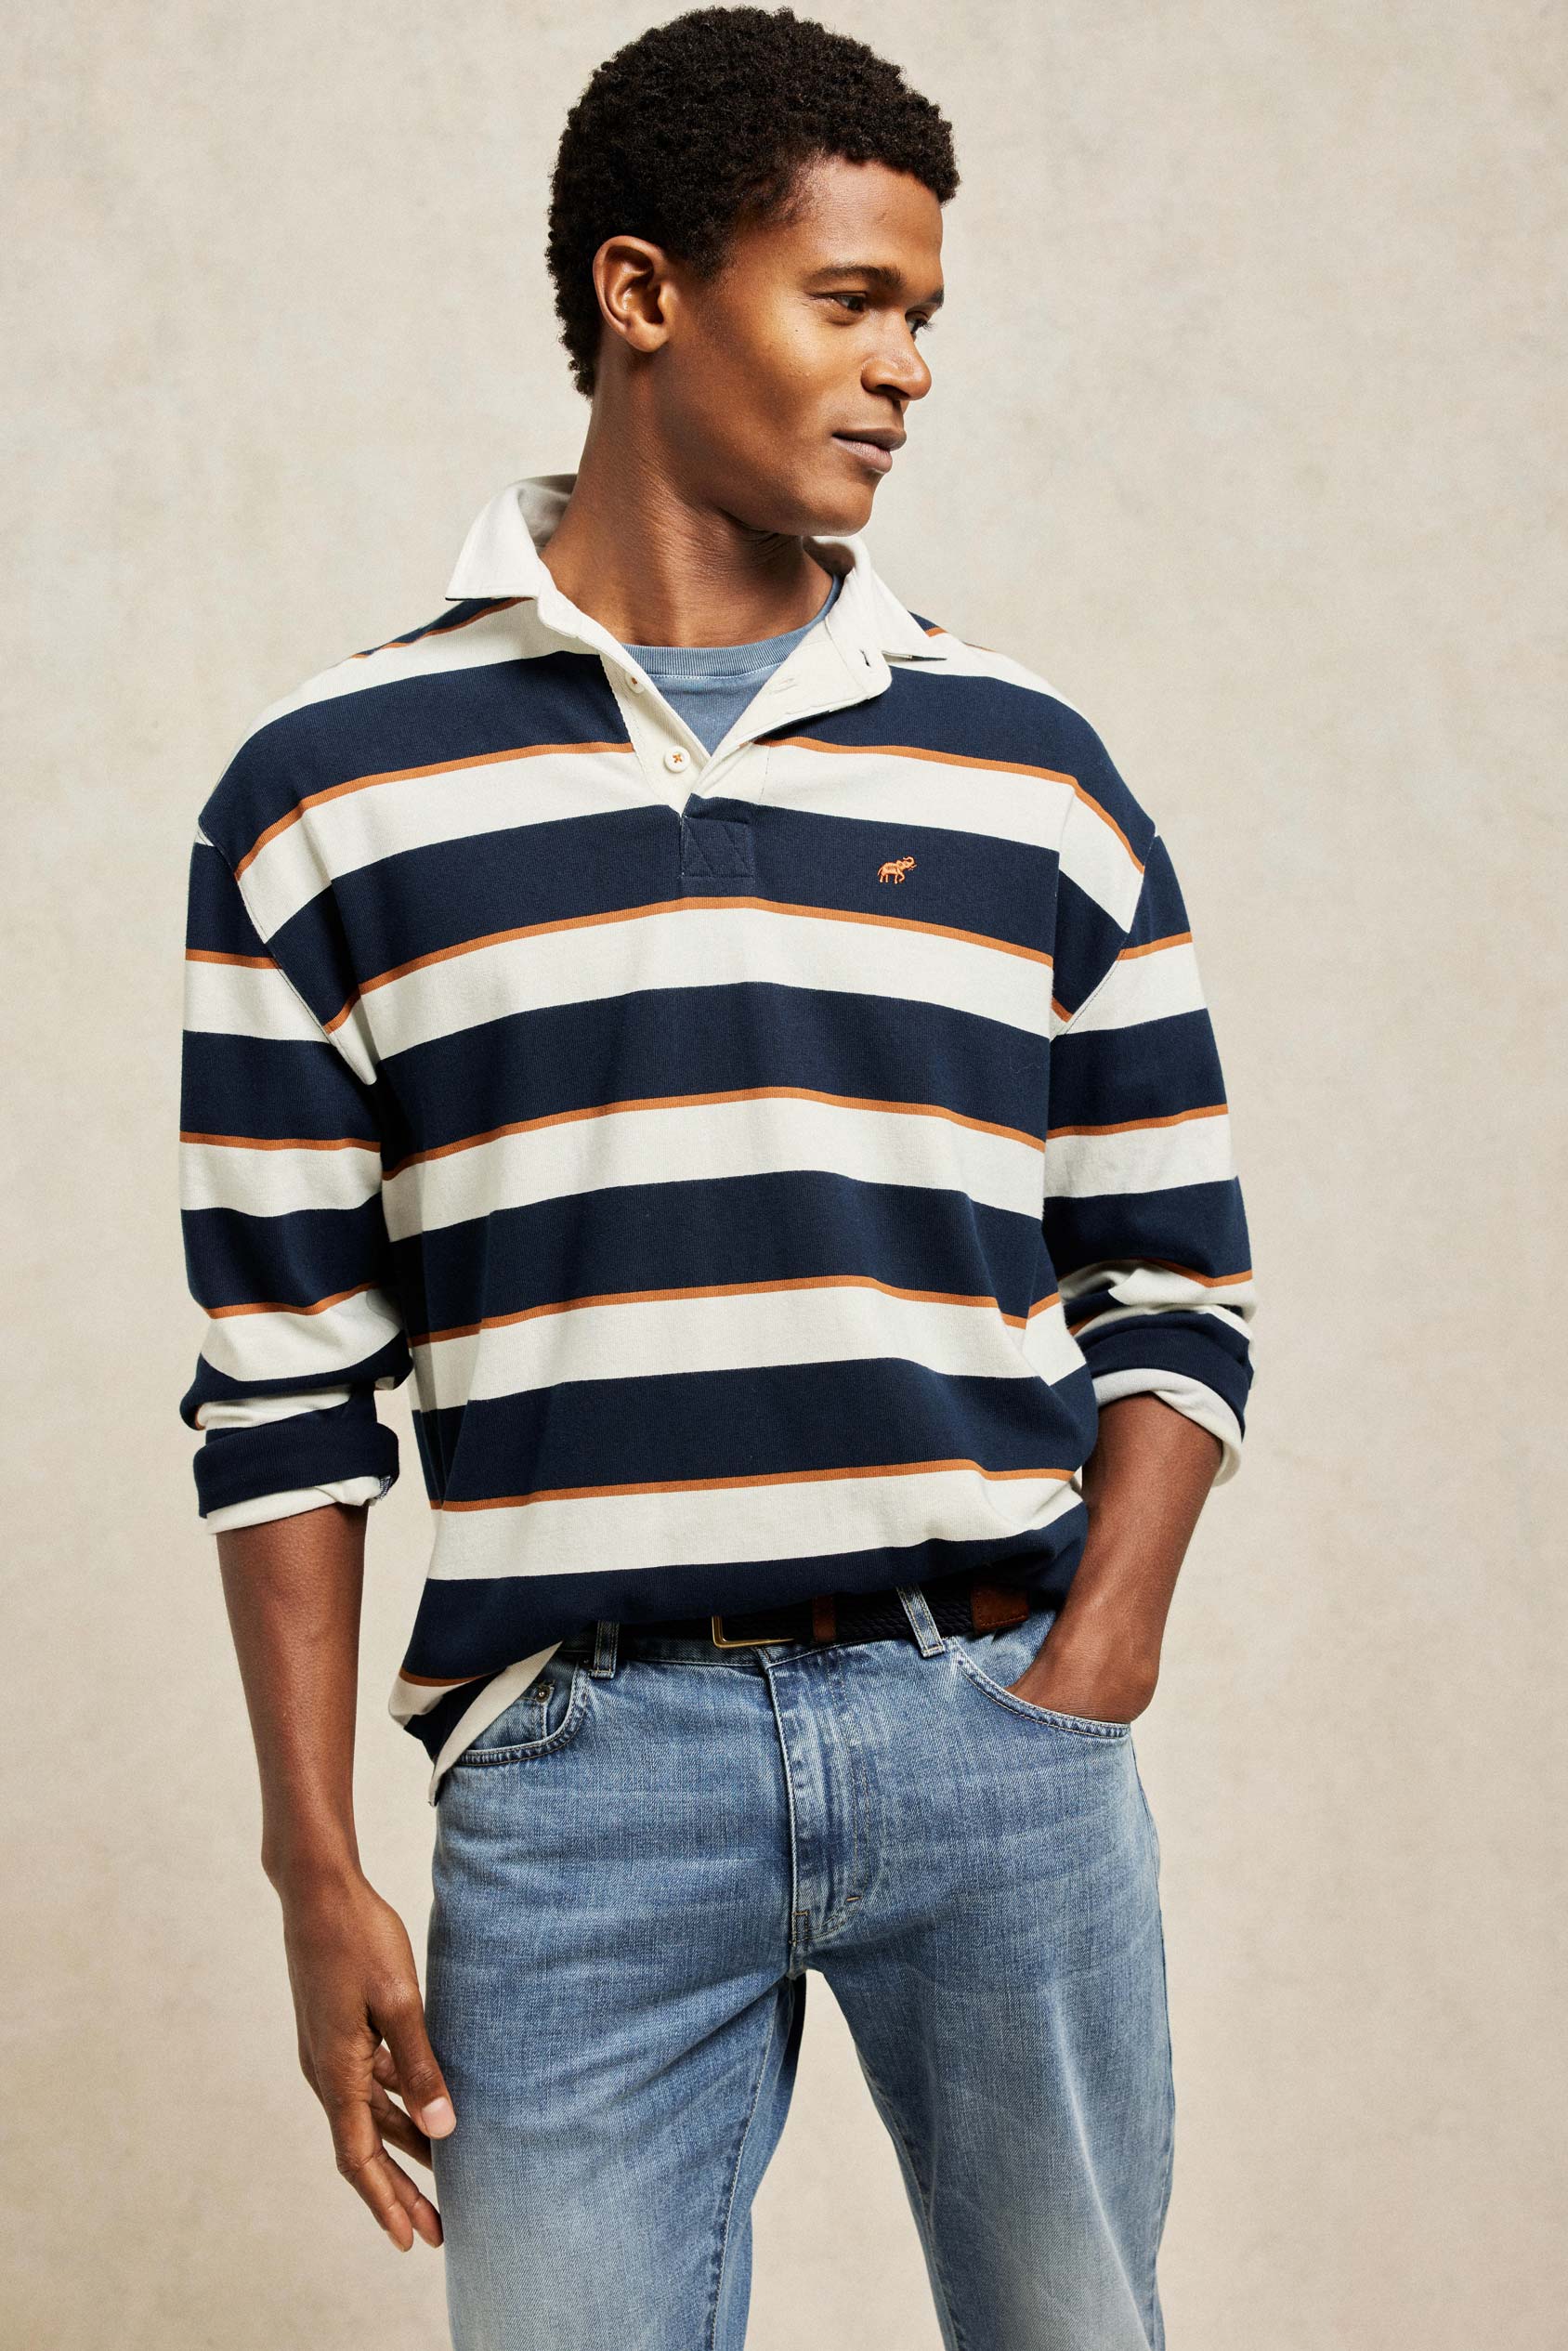 Yarn dyed men’s navy blue and white stripe rugby shirt with a vintage classic collar and soft peached finish. 100% Cotton. Casual wear. Machine wash. Size S, M, L, XL, XXL.